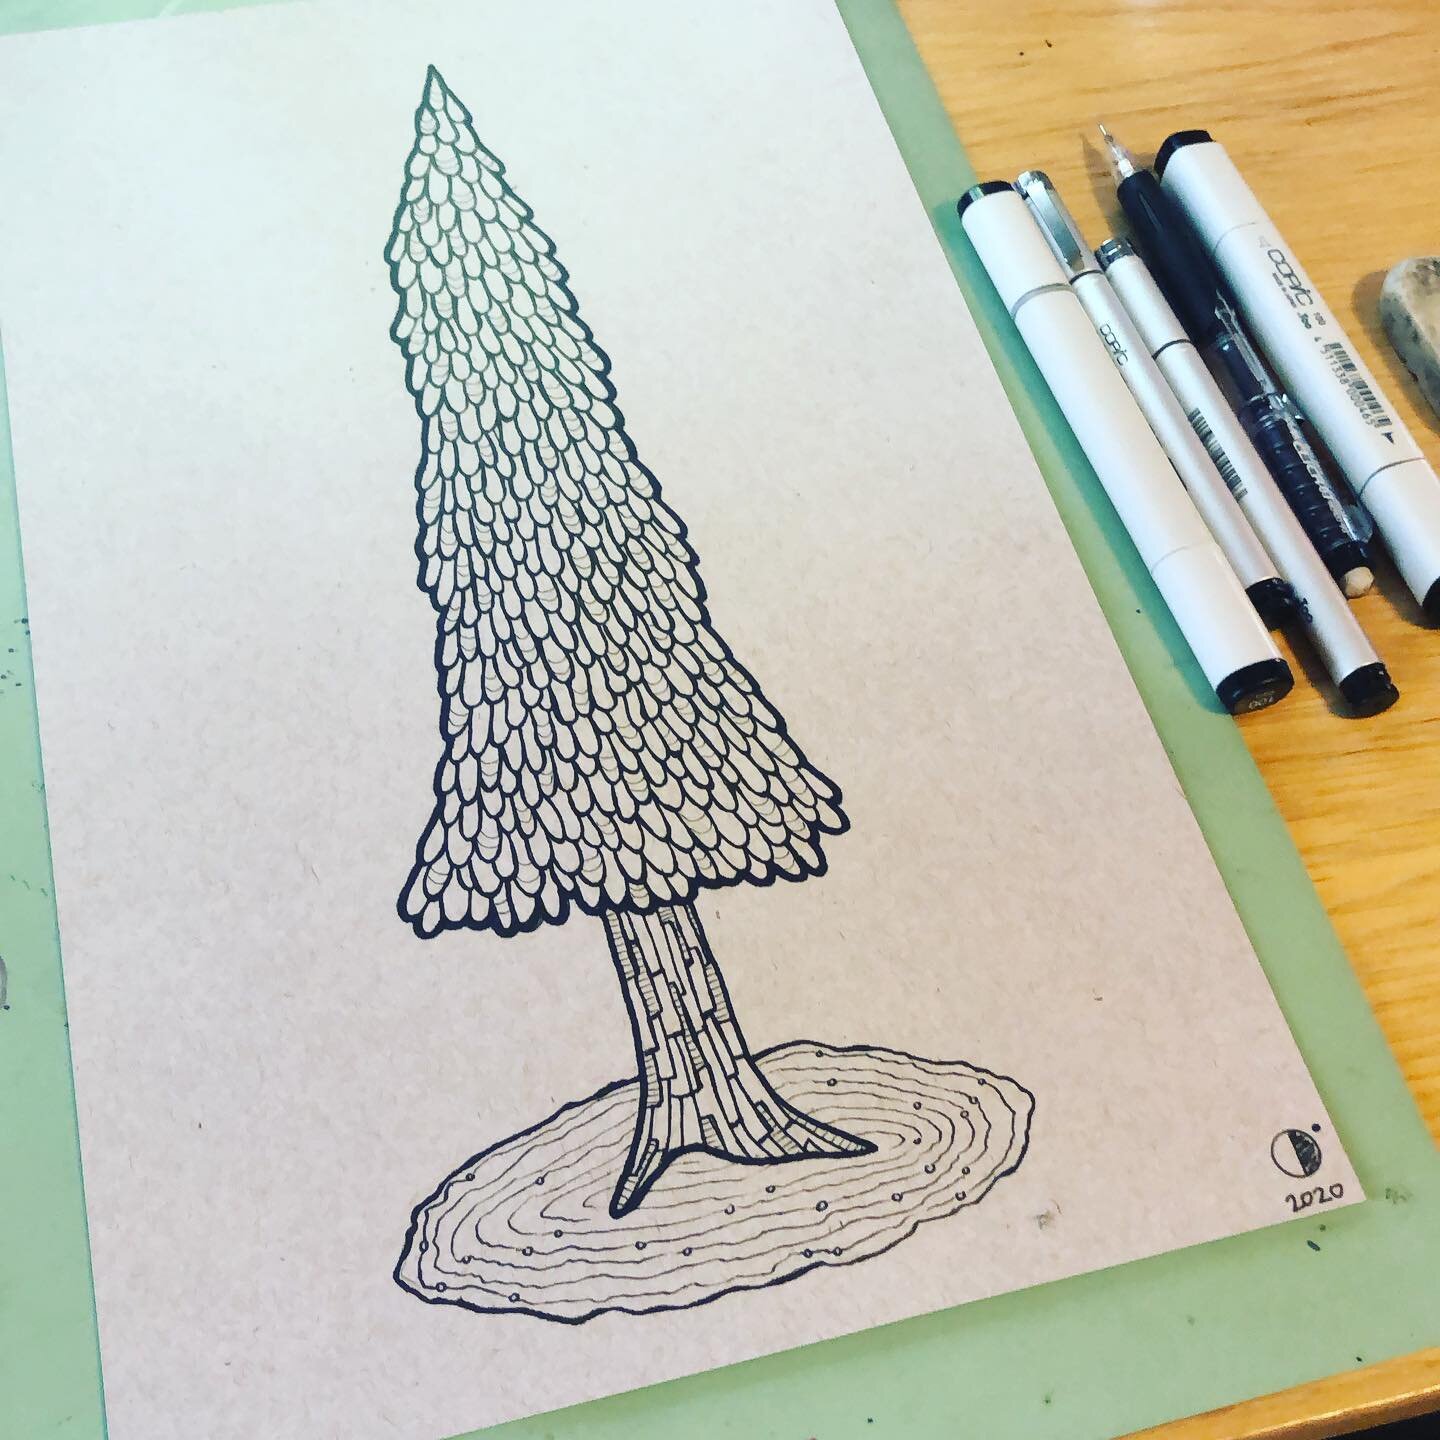 Another day, another drawing. 

#drawingpractice #inkdrawing #treedrawing